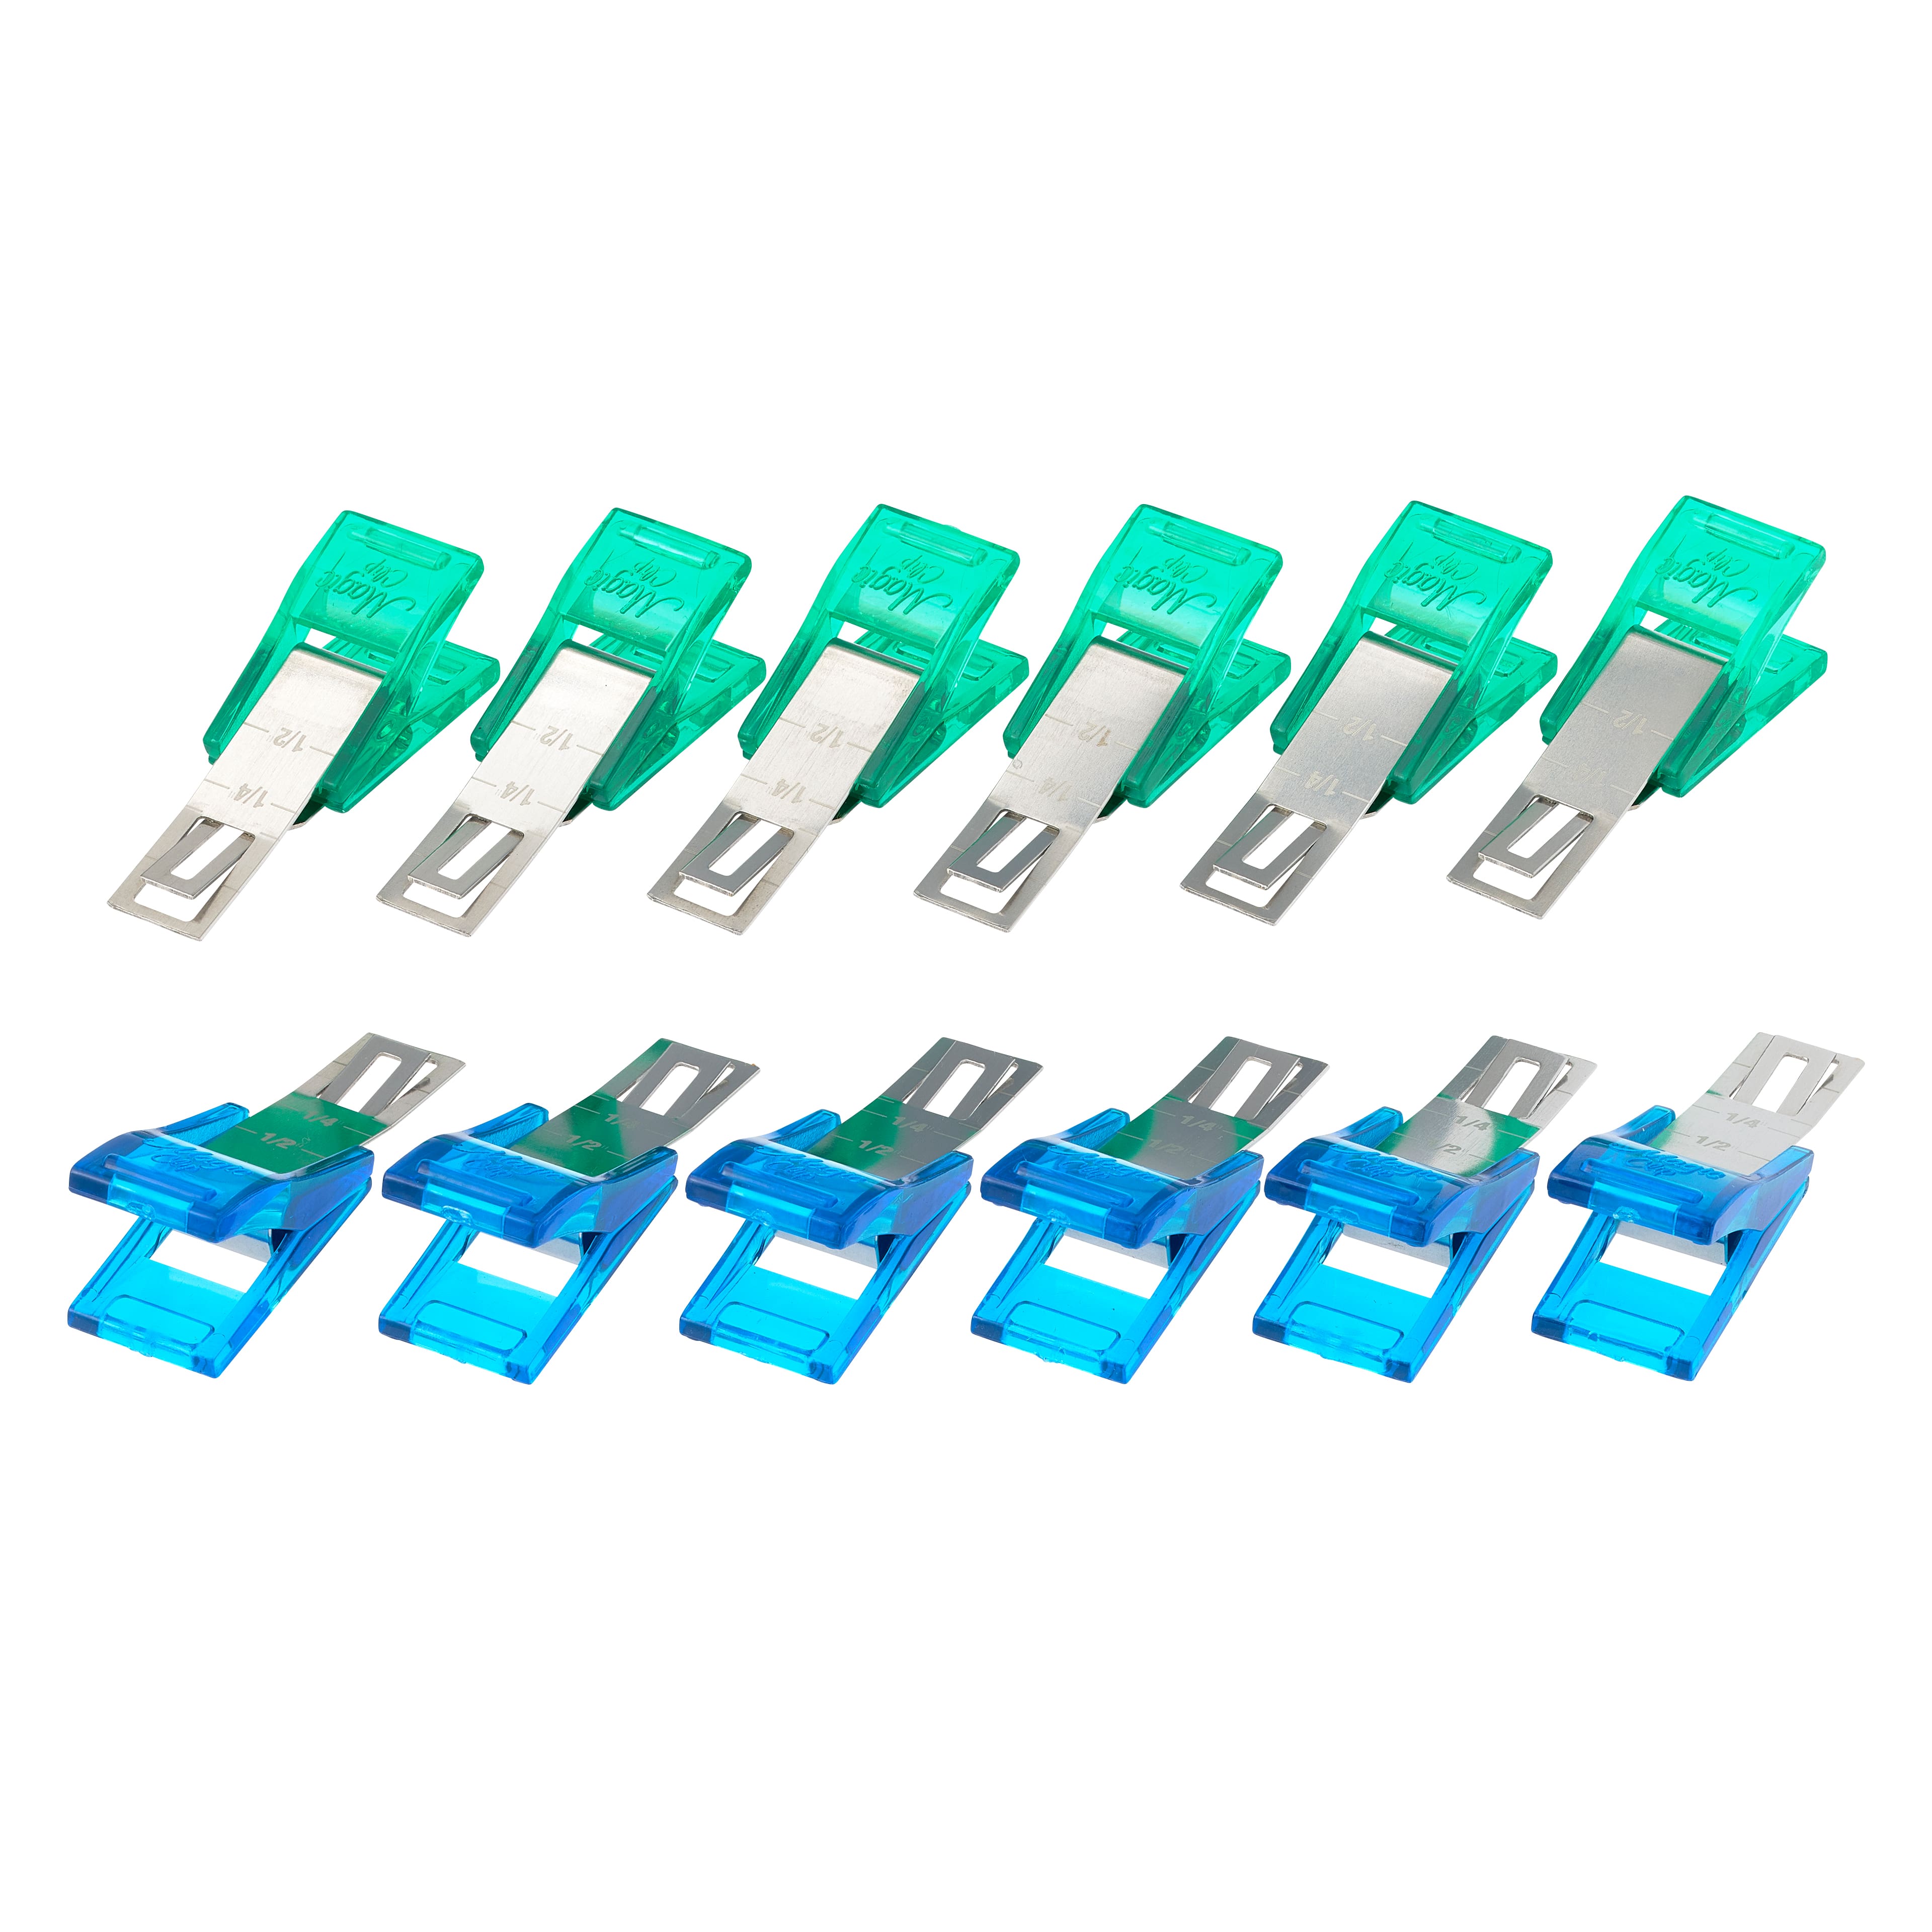 12 Packs: 12 ct. (144 total) Small Magic Clips™